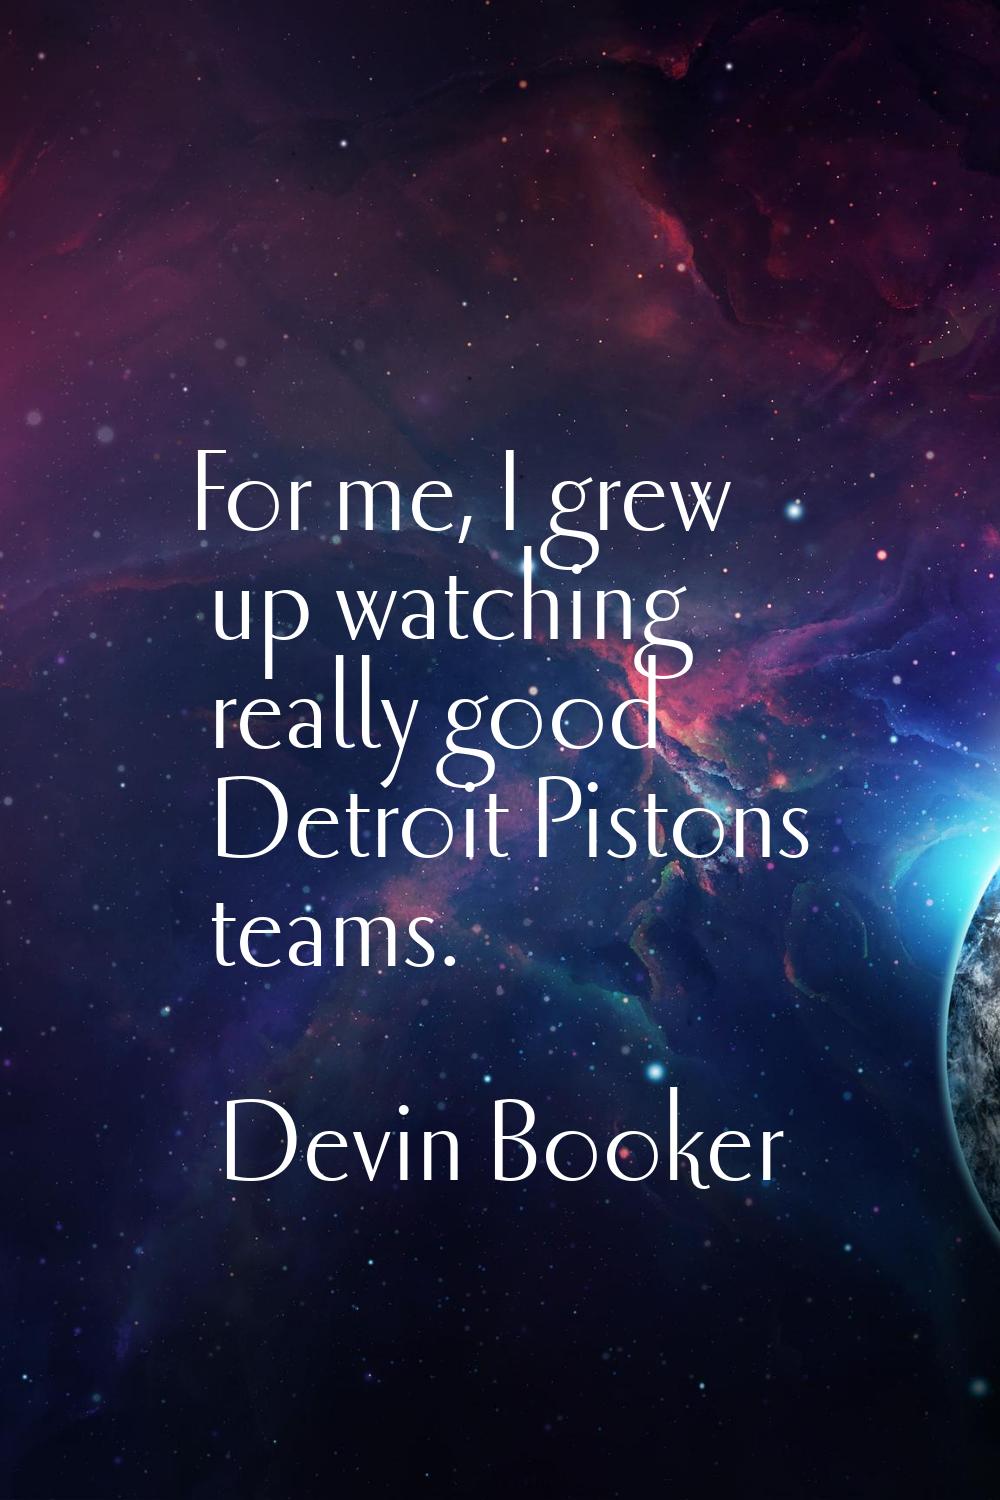 For me, I grew up watching really good Detroit Pistons teams.